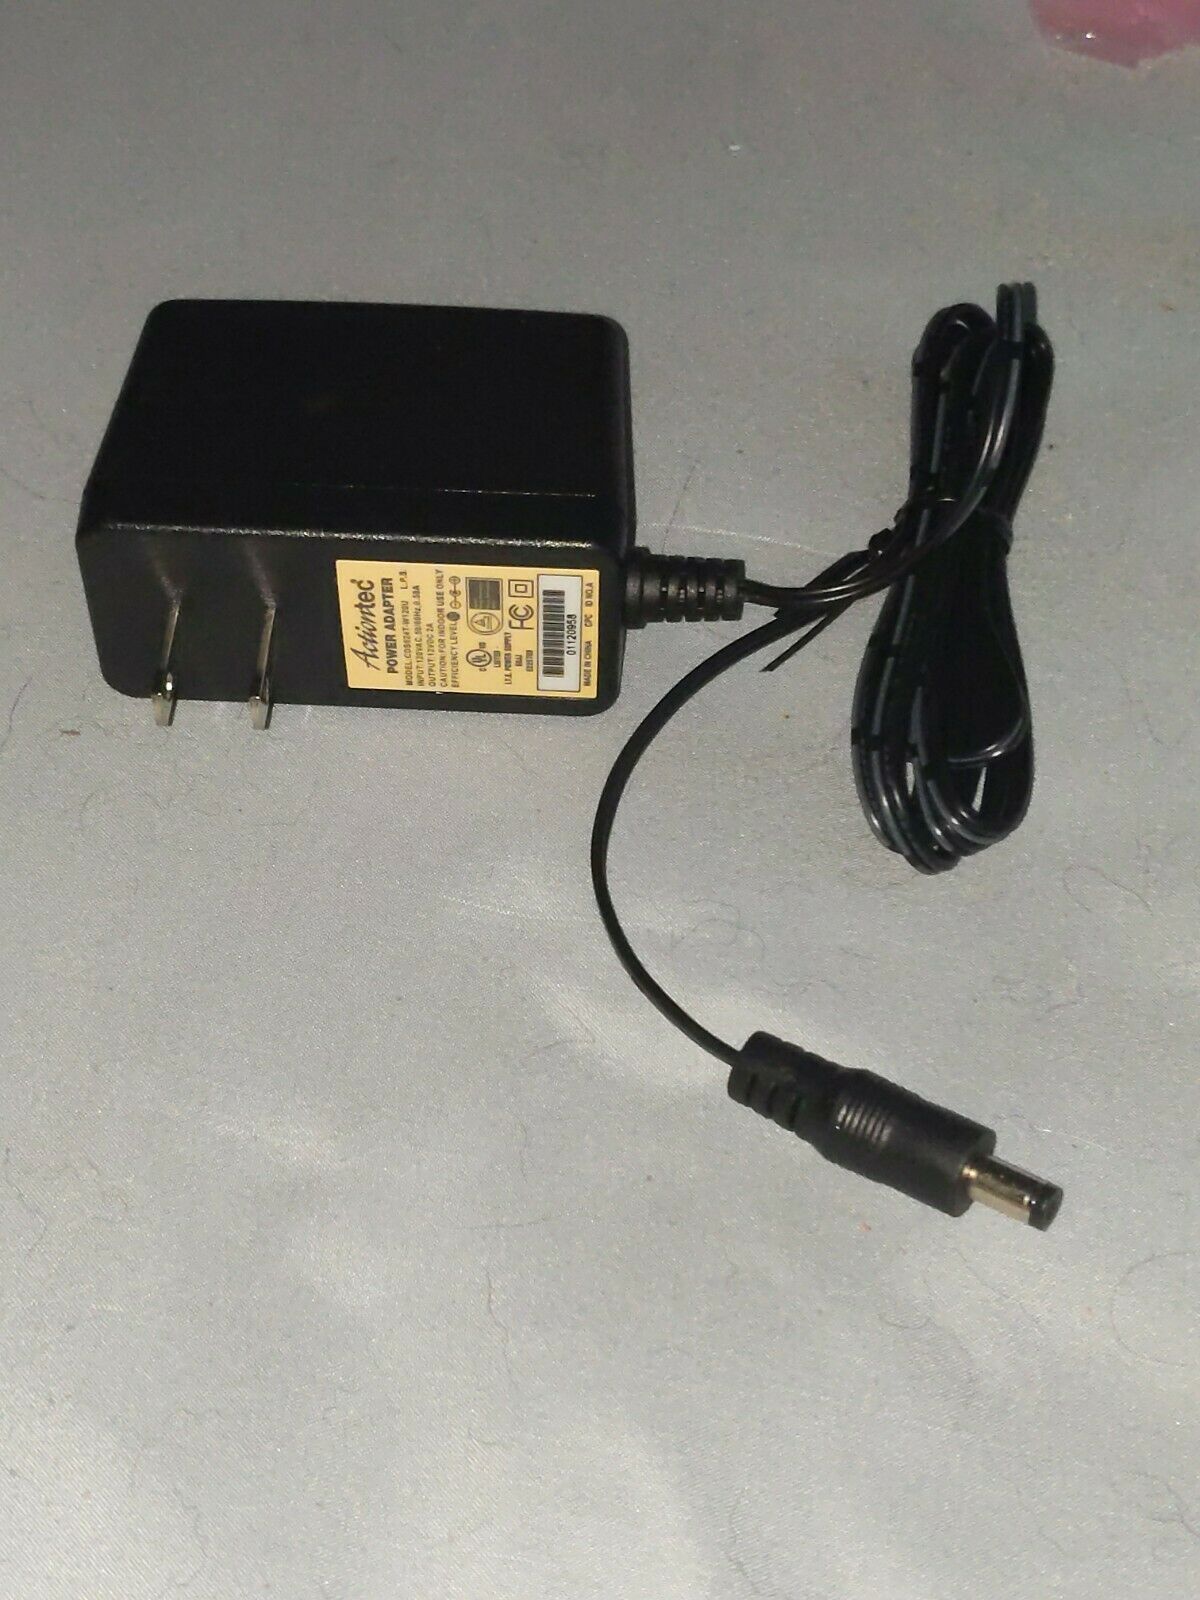 CenturyLink Actiontec C3000a DC Power Supply Adapter Genuine CDS024T-W120U Brand: Action-Tec Type: Adapter Model: - Click Image to Close